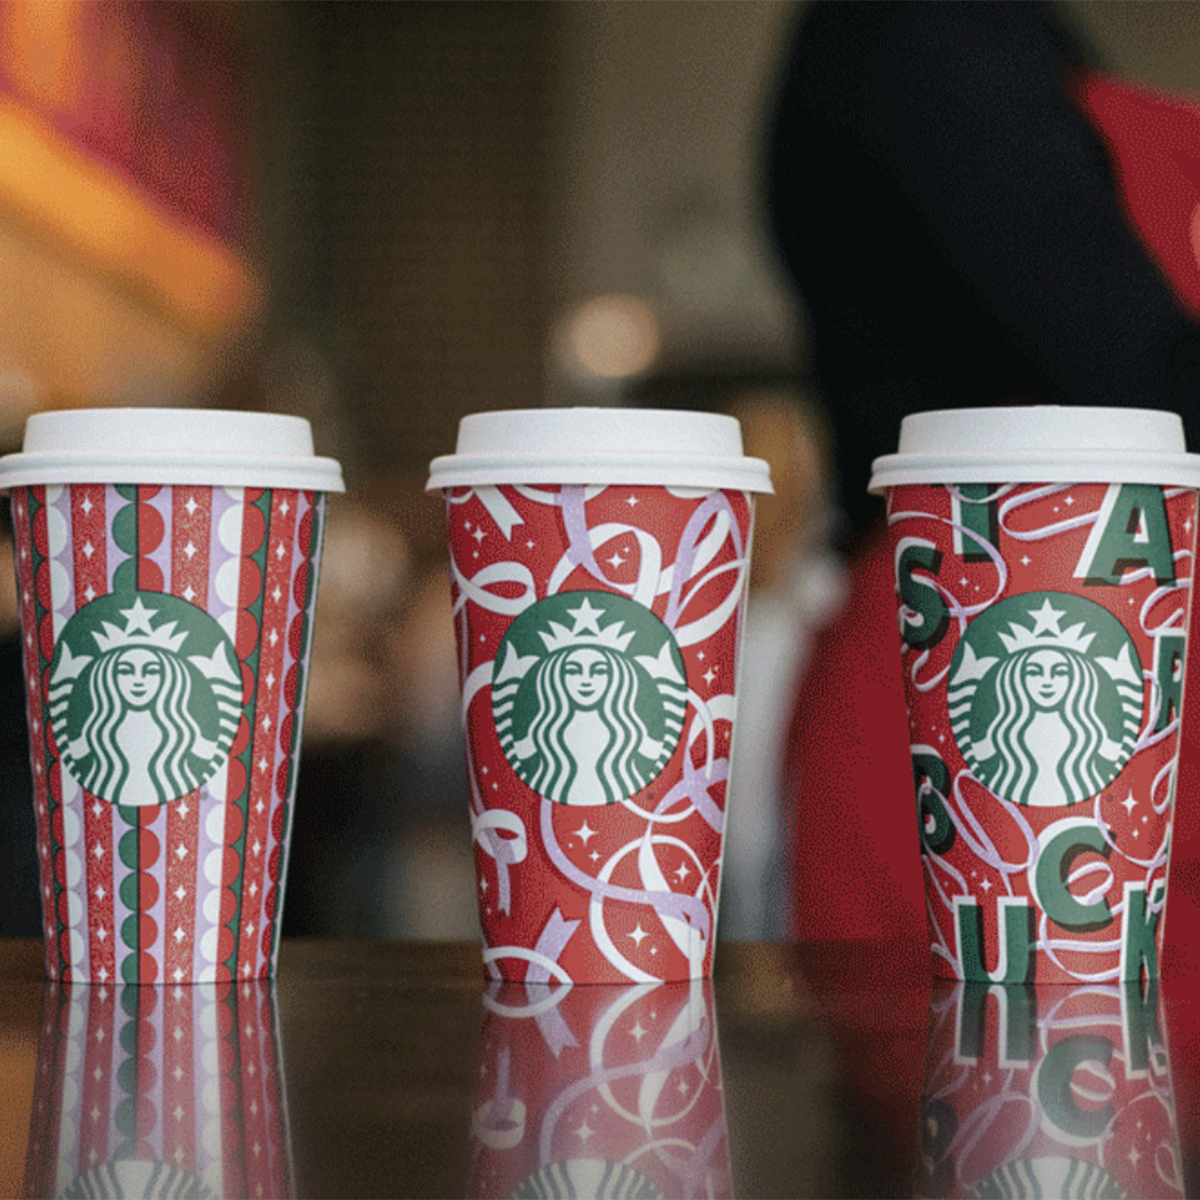 https://akns-images.eonline.com/eol_images/Entire_Site/2021103/rs_1200x1200-211103091444-1200-Starbucks-Holiday-Cups.jpg?fit=around%7C1200:1200&output-quality=90&crop=1200:1200;center,top